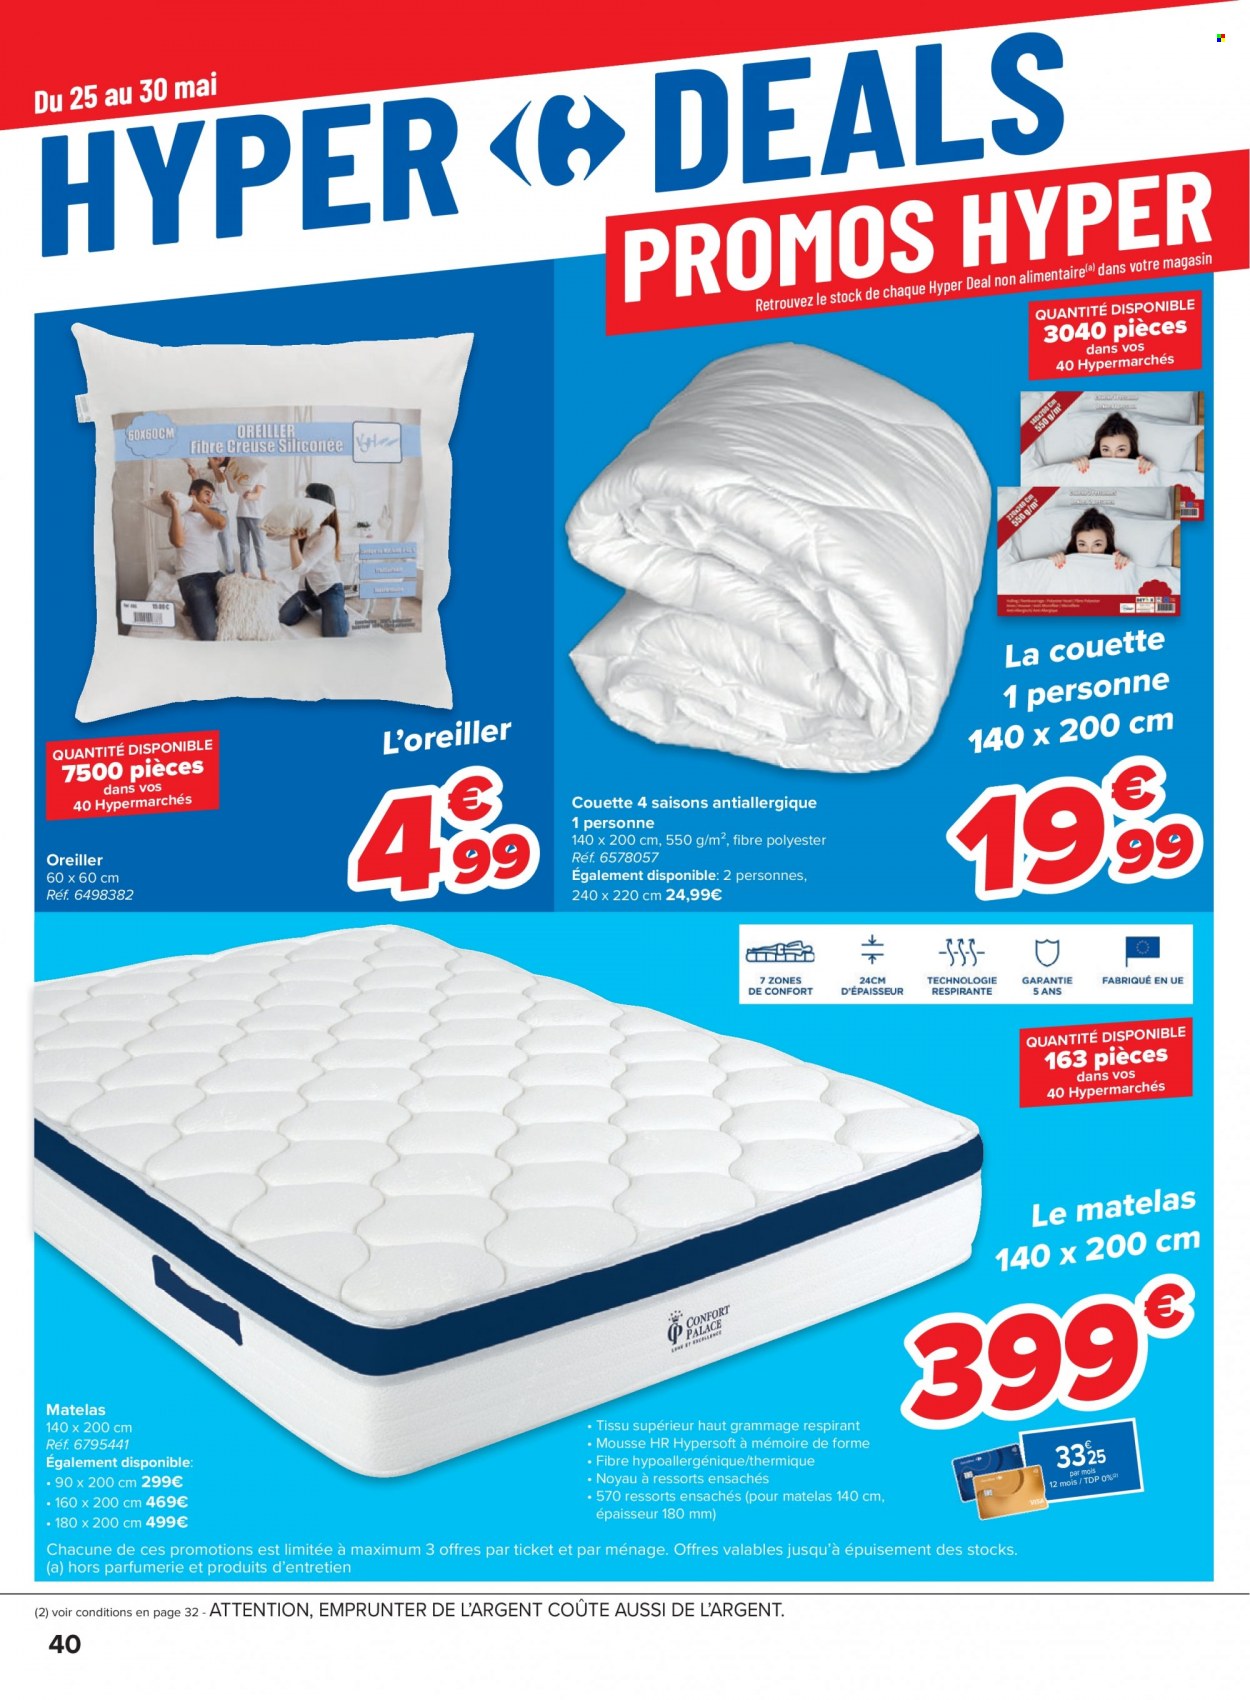 Catalogue Carrefour hypermarkt - 25.5.2022 - 31.5.2022. Page 40.